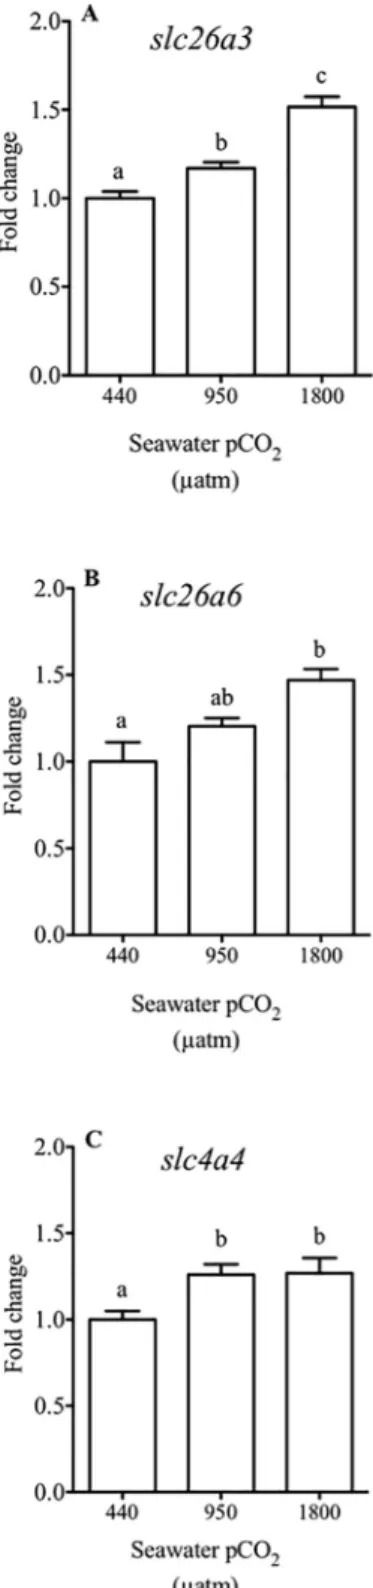 Fig 3. Relative expression of the genes in intestine from sea bream. Relative expression (fold change of gene expression using 18S as the housekeeping gene) of slc26a3 (A), slc26a6 (B) and slc4a4 (C) in the anterior intestine of sea bream in response to di